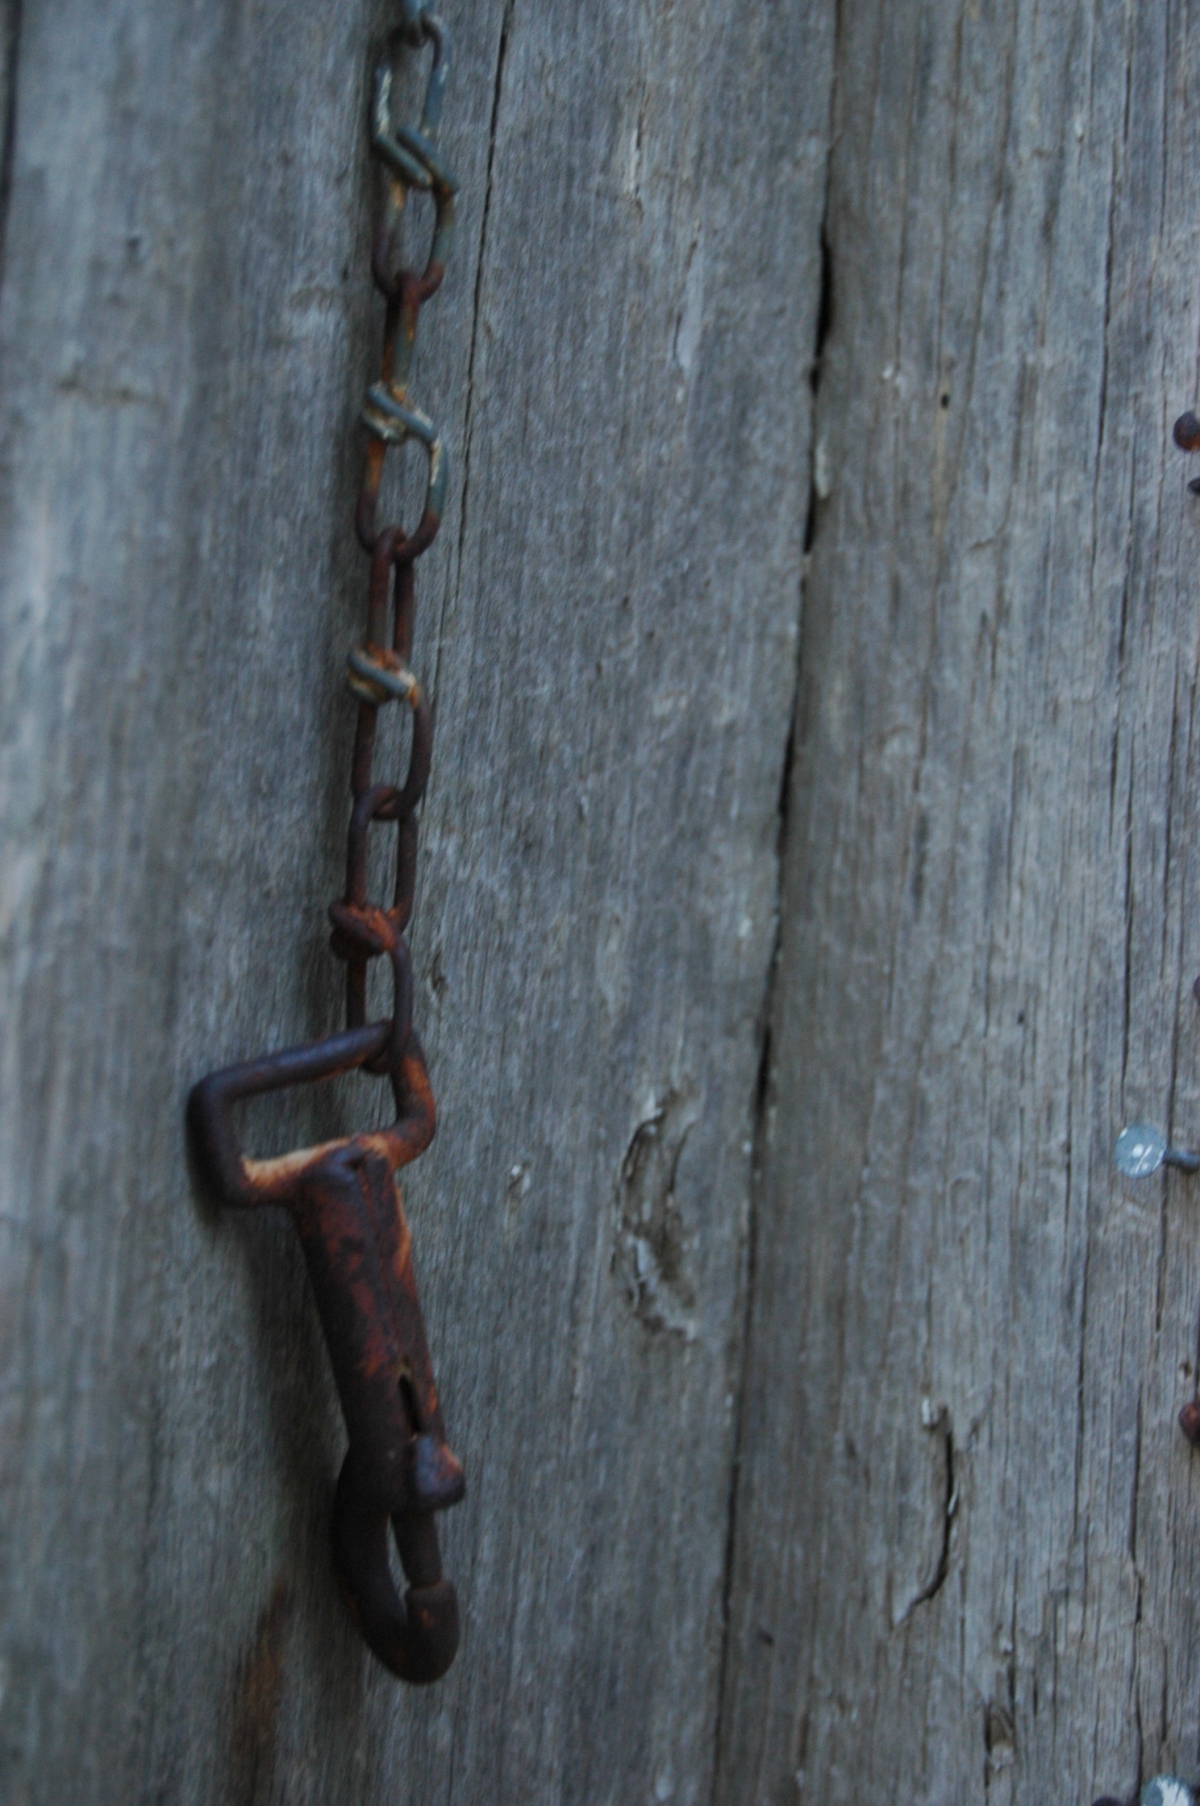 Rusted chain on the schoolhouse door - Safe Haven Farm, Haven, KS